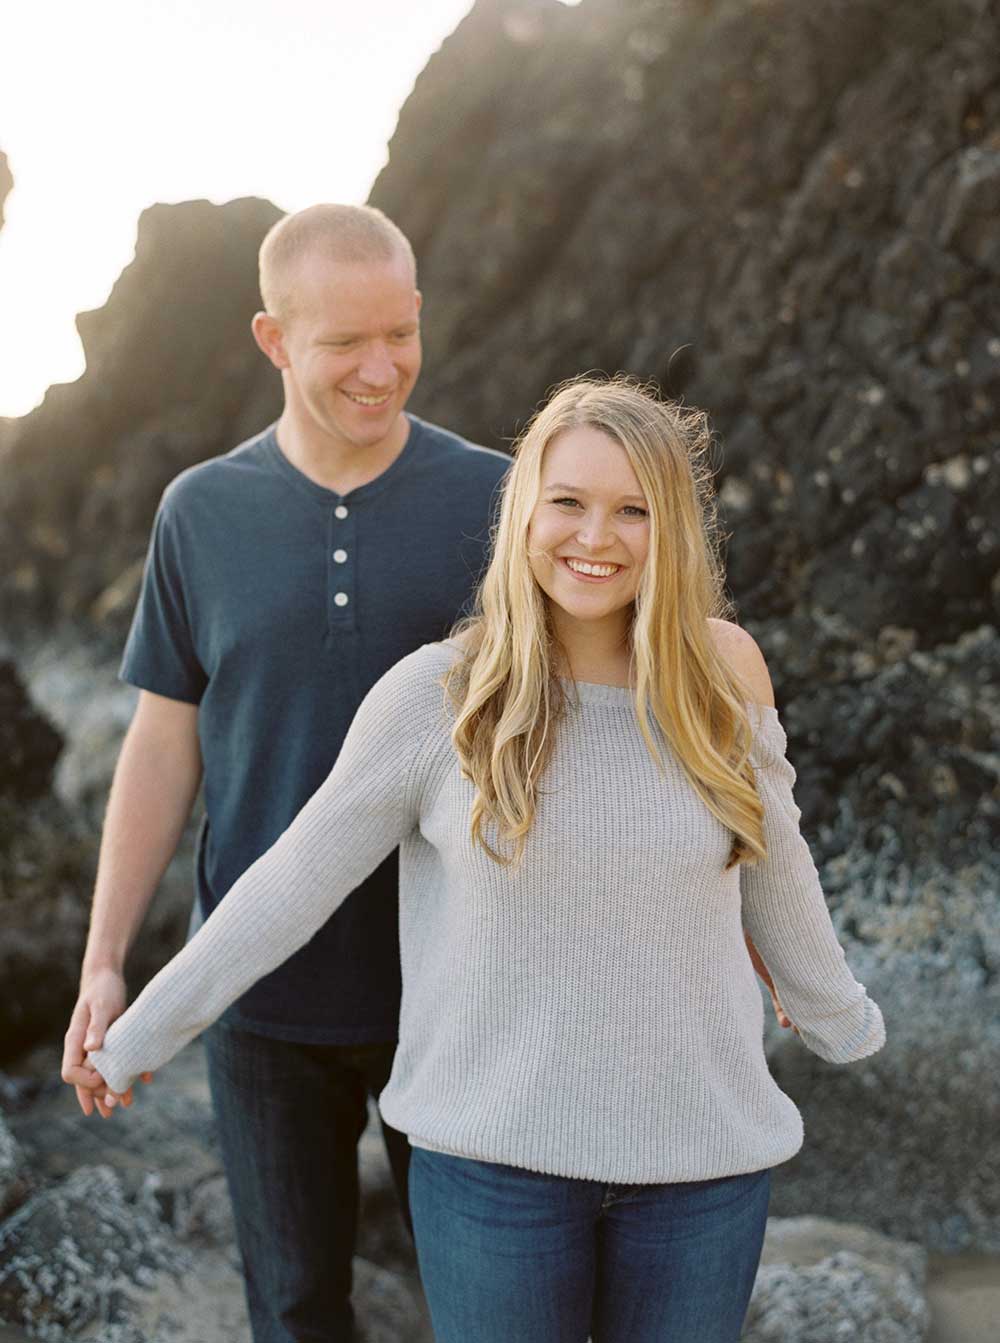 Arcadia Beach Engagement Session by Outlive Creative